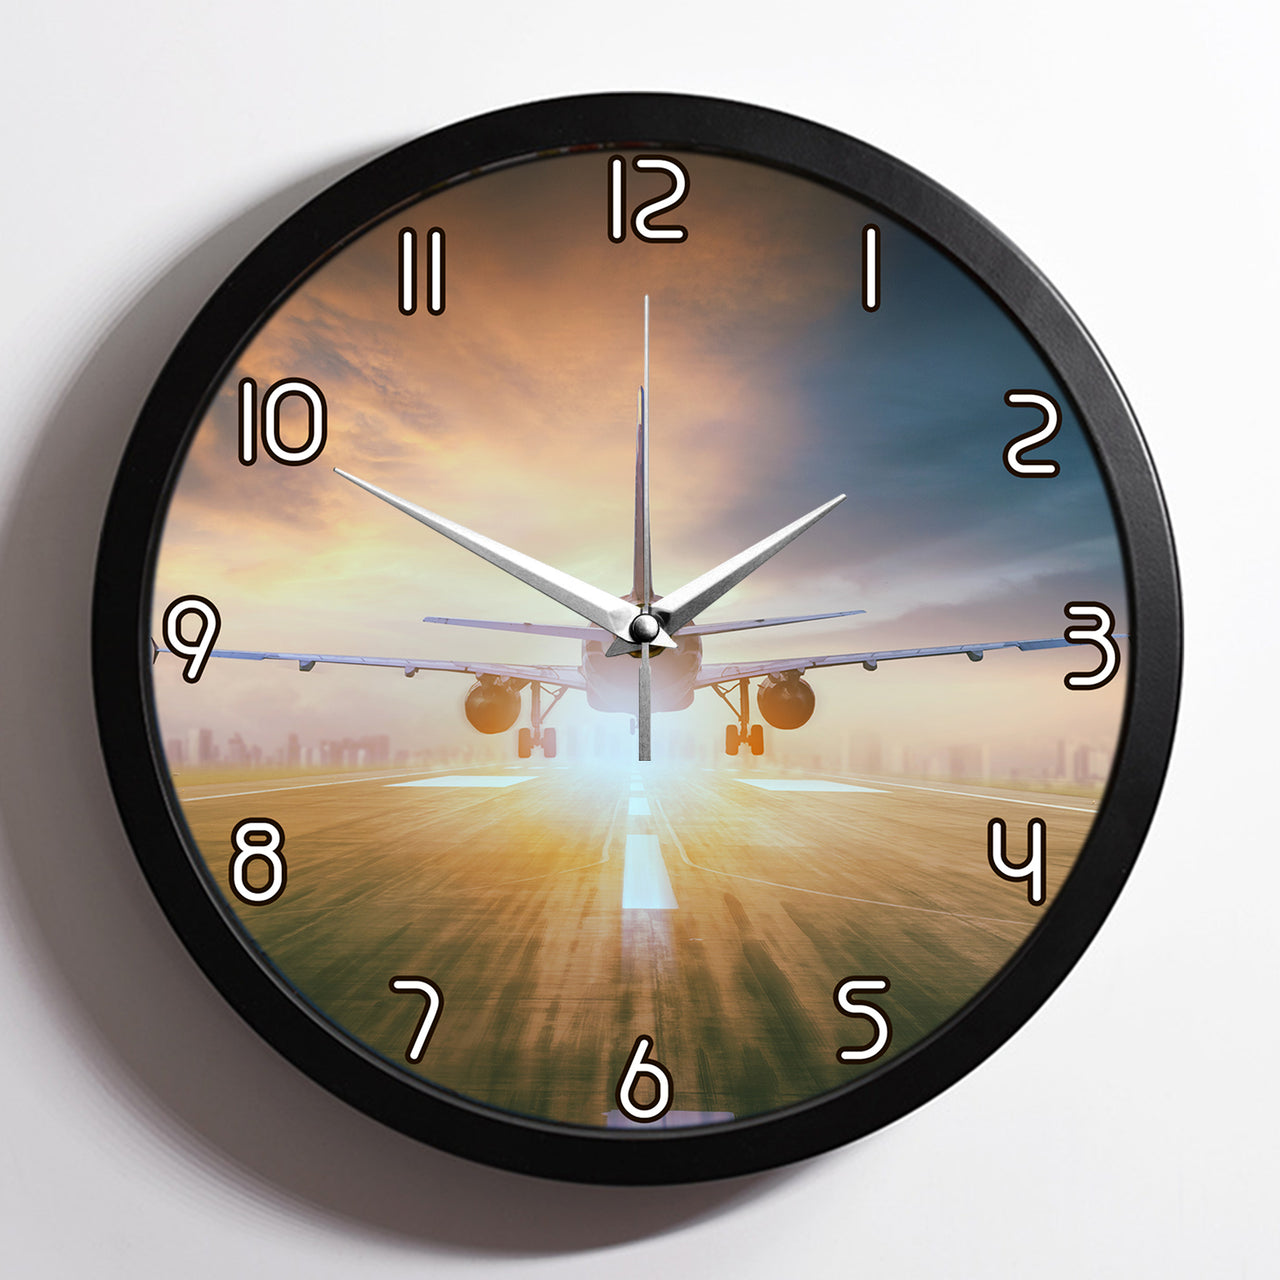 Airplane Flying Over Runway Designed Wall Clocks